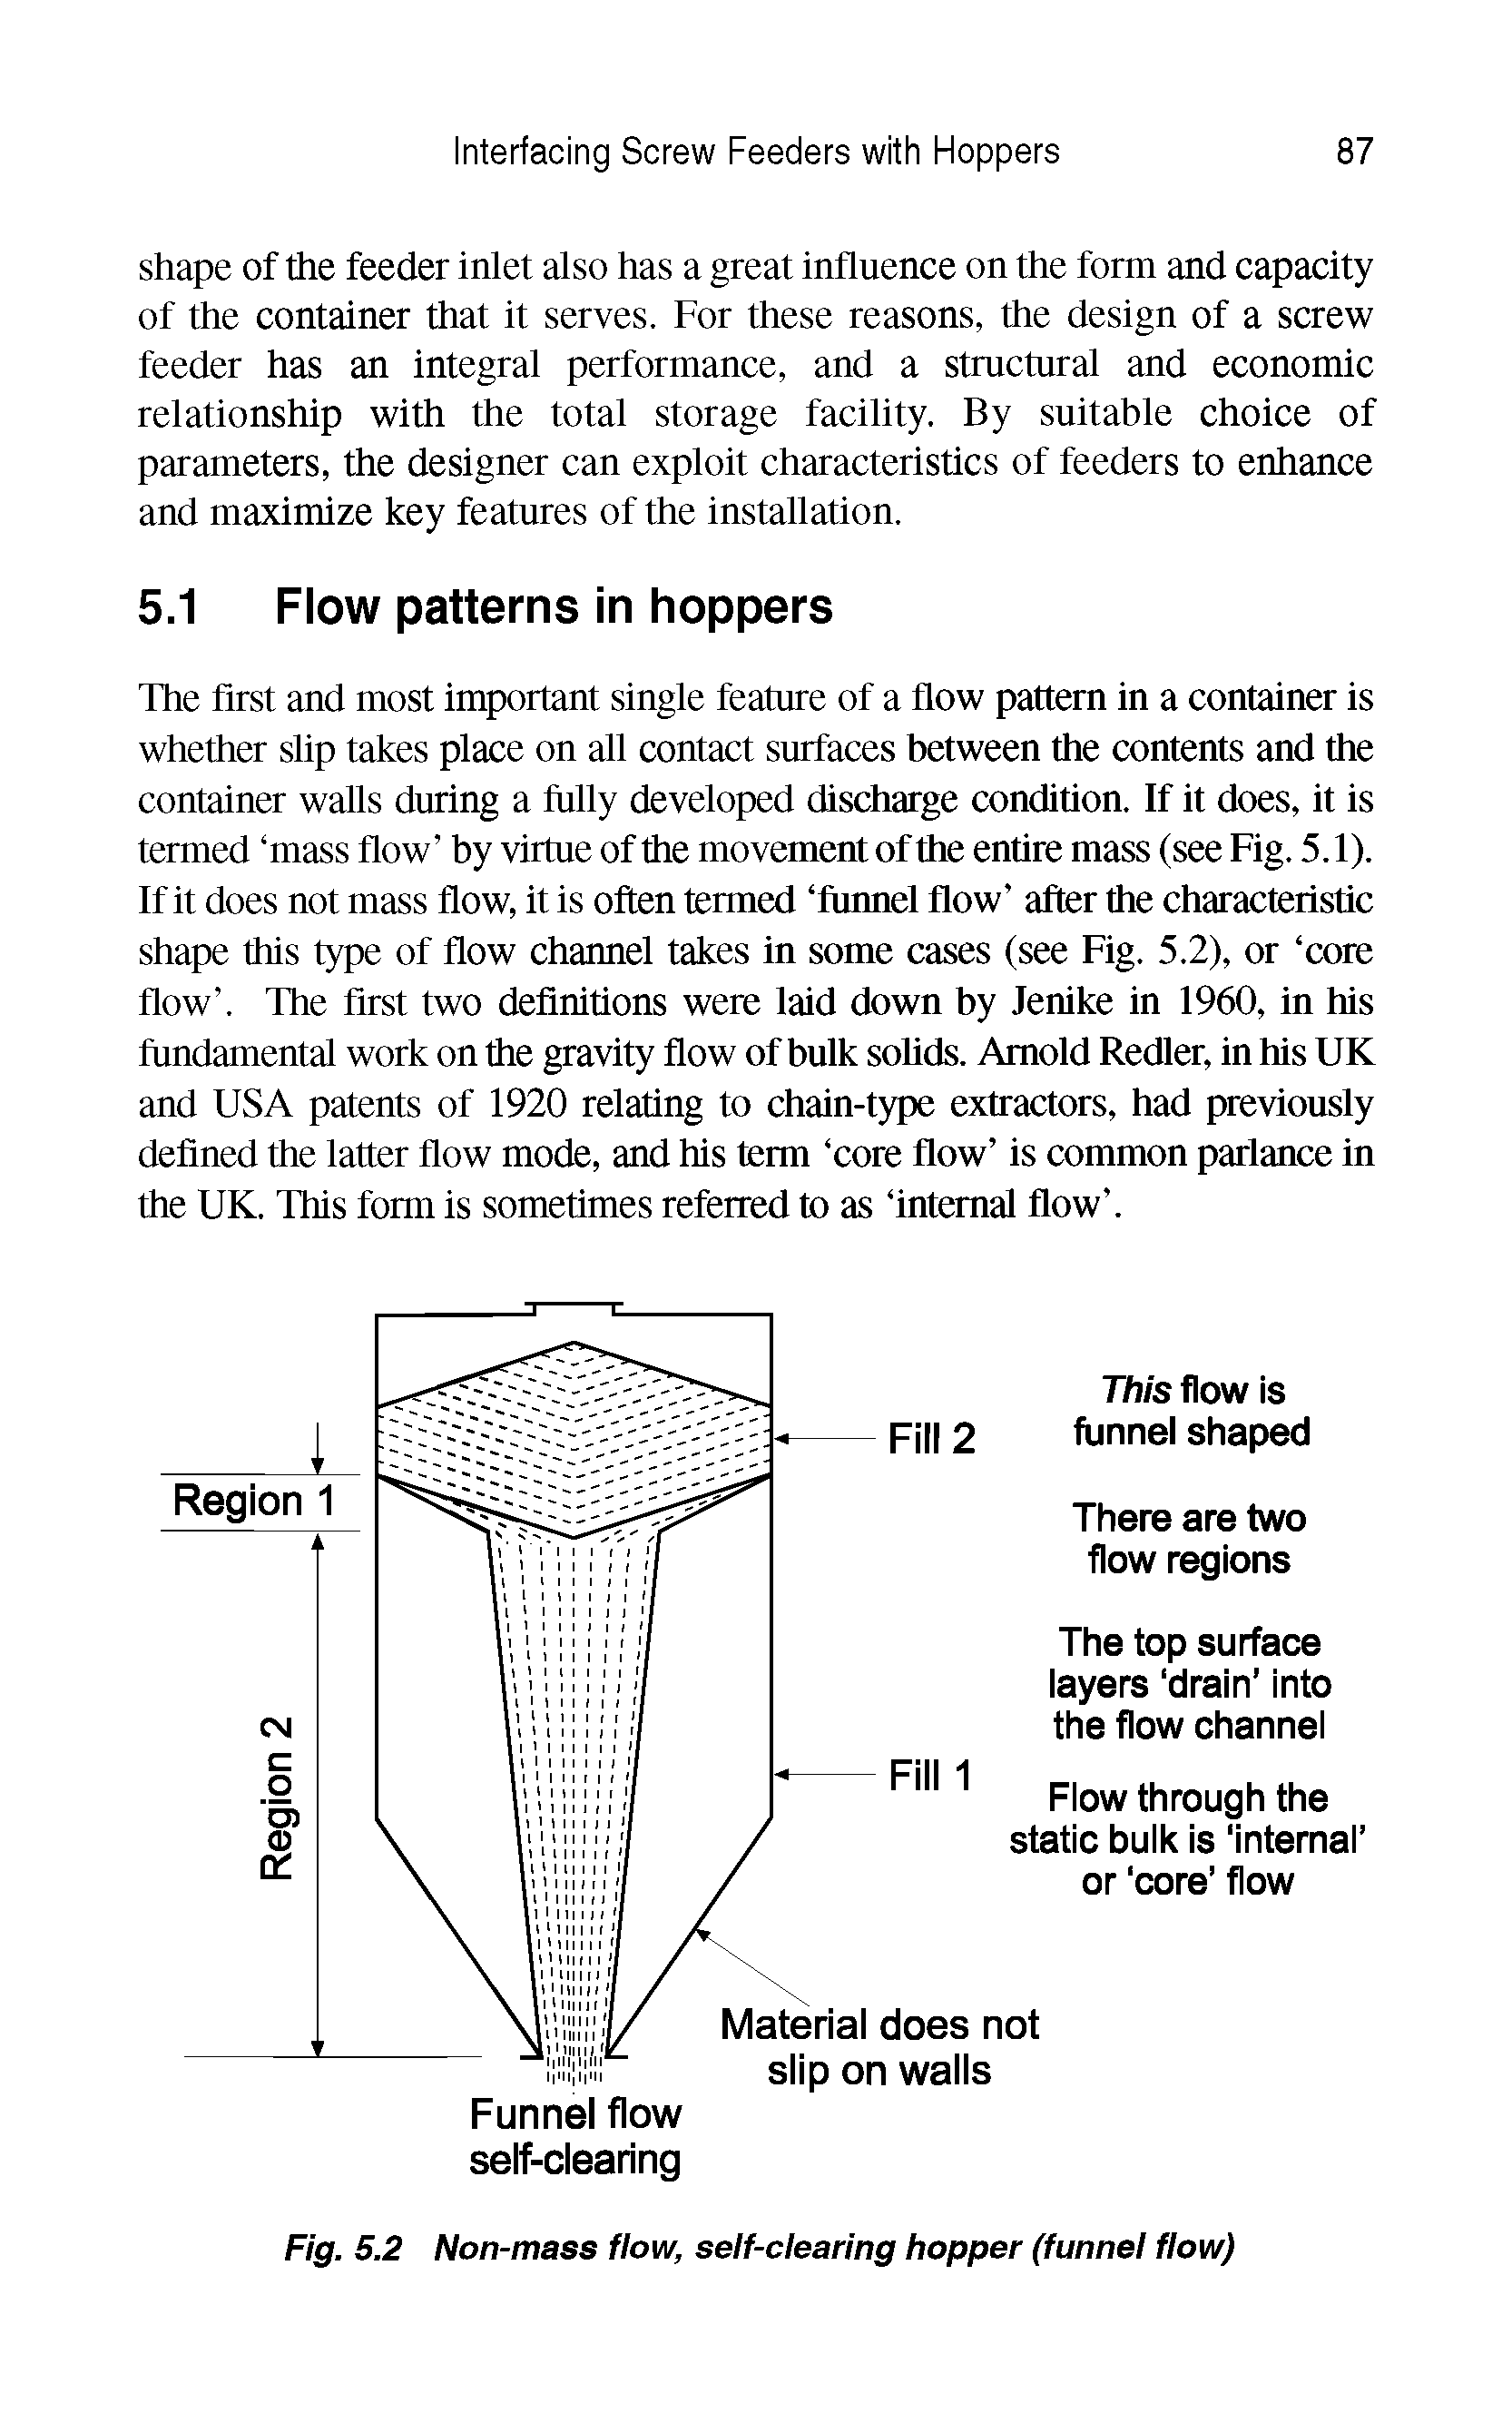 Fig. 5.2 Non-mass flow, self-clearing hopper (funnel flow)...